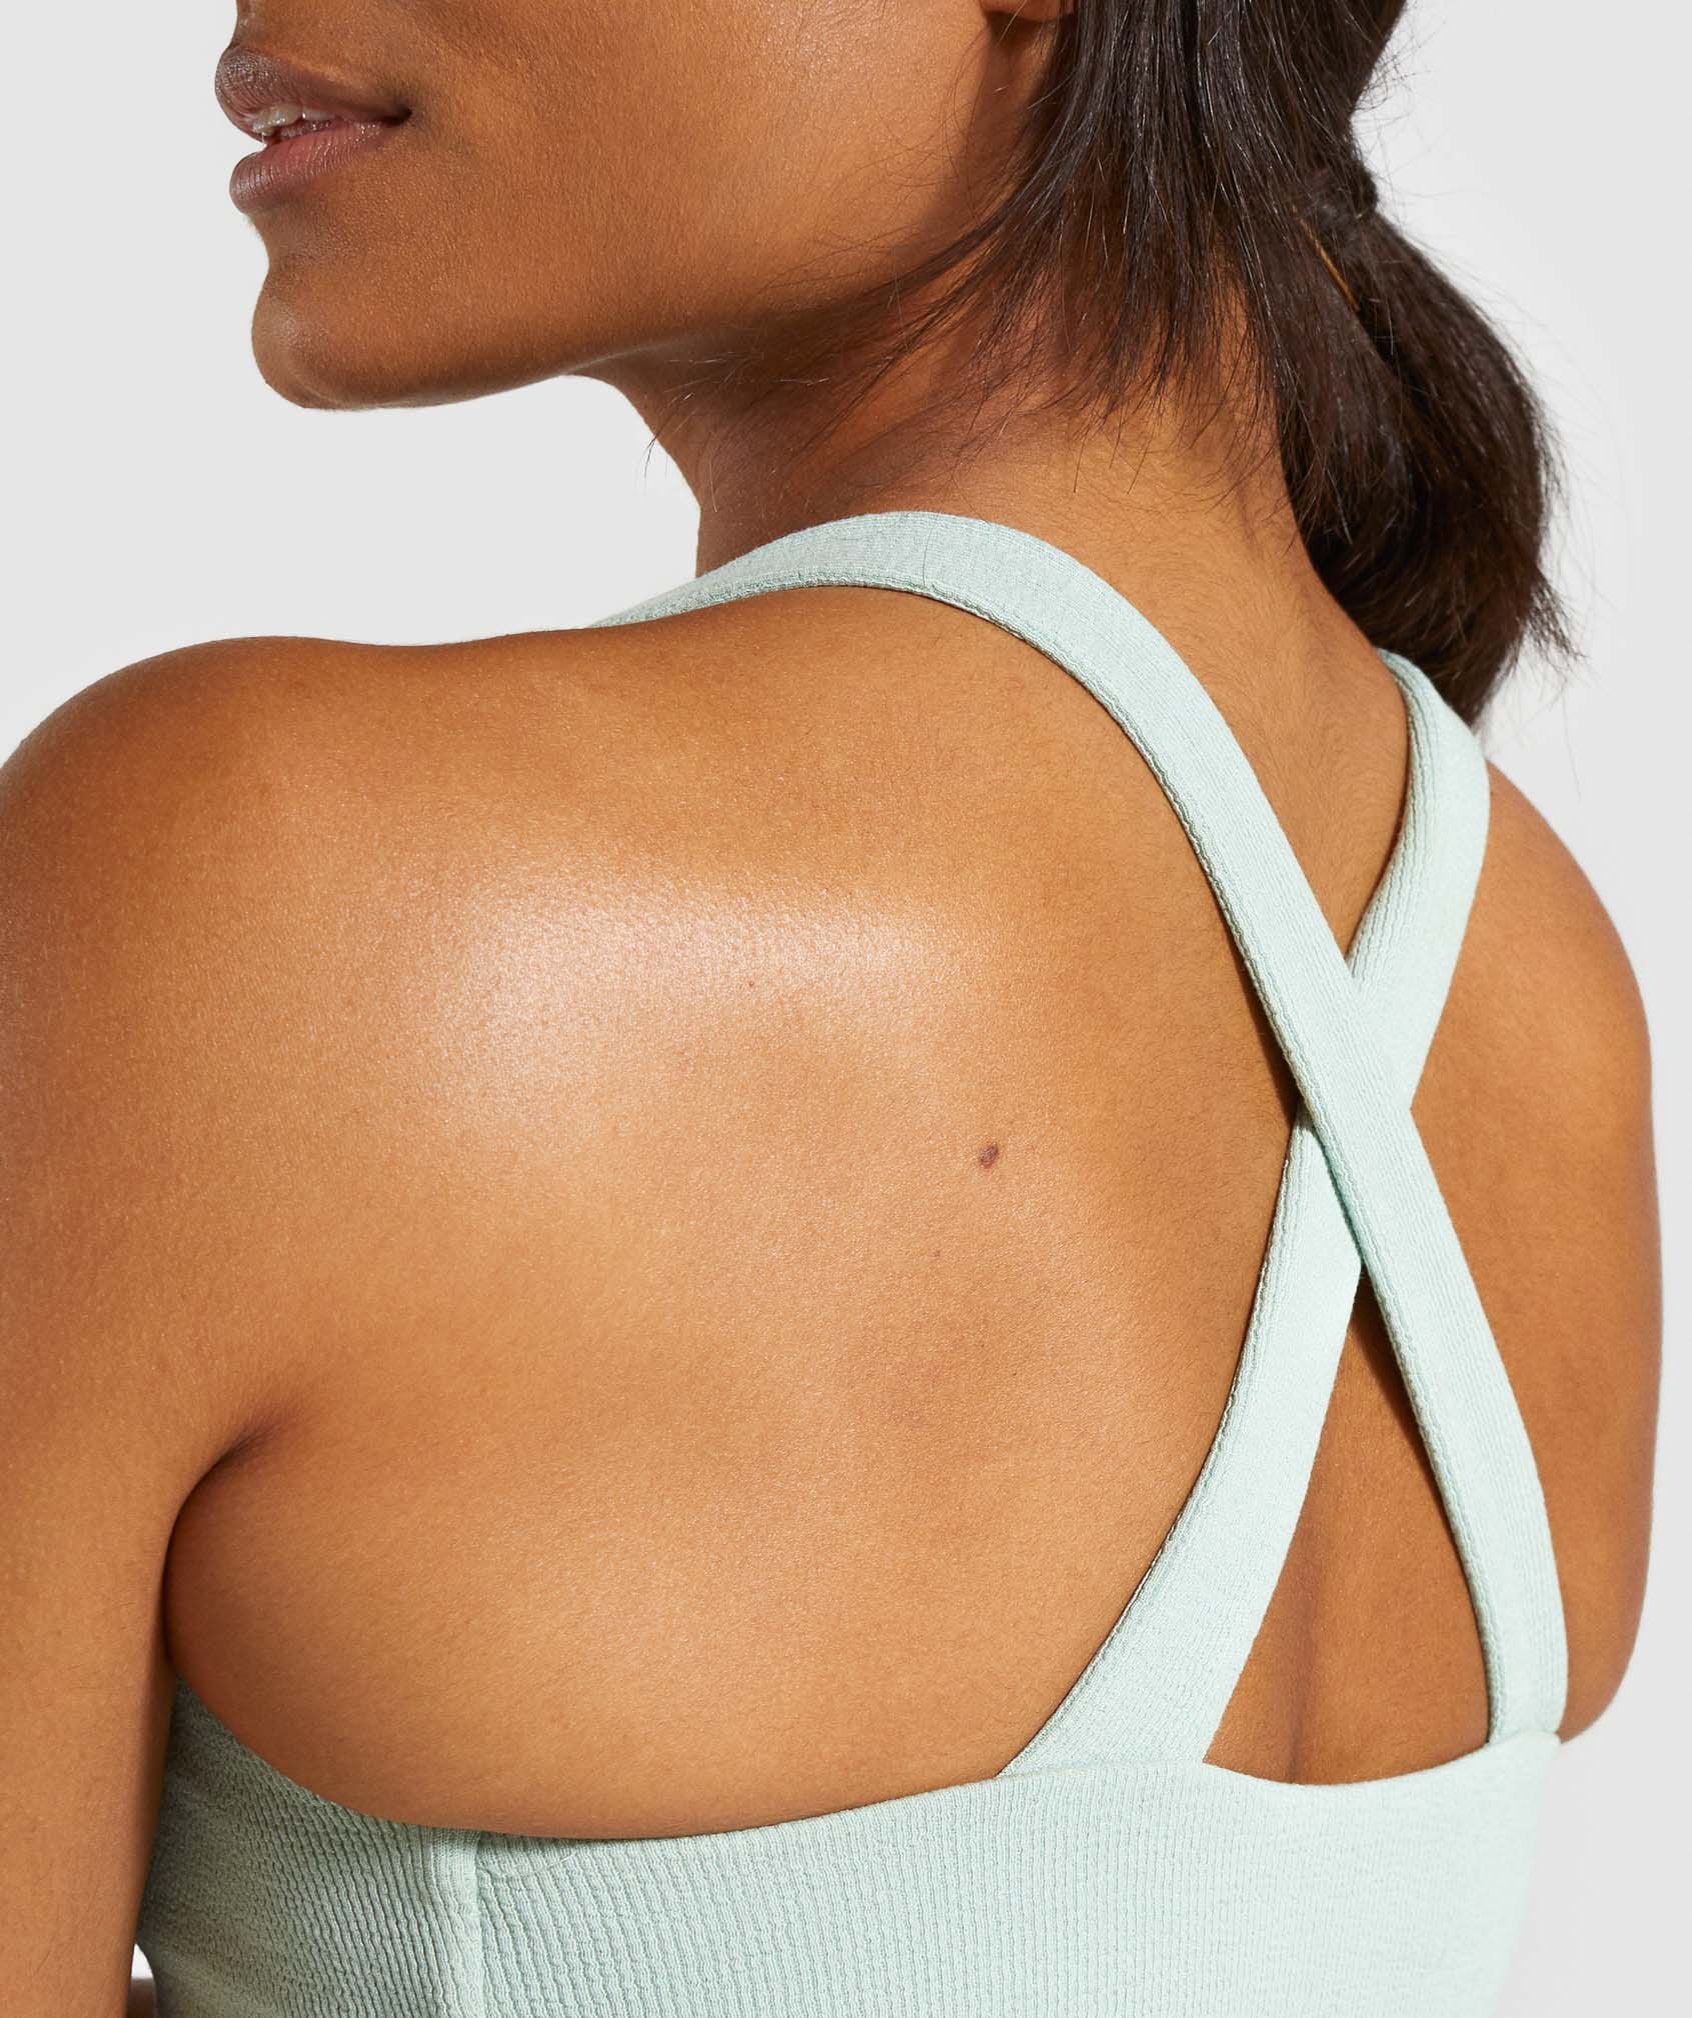 Poise Sports Bra in Light Green - view 5